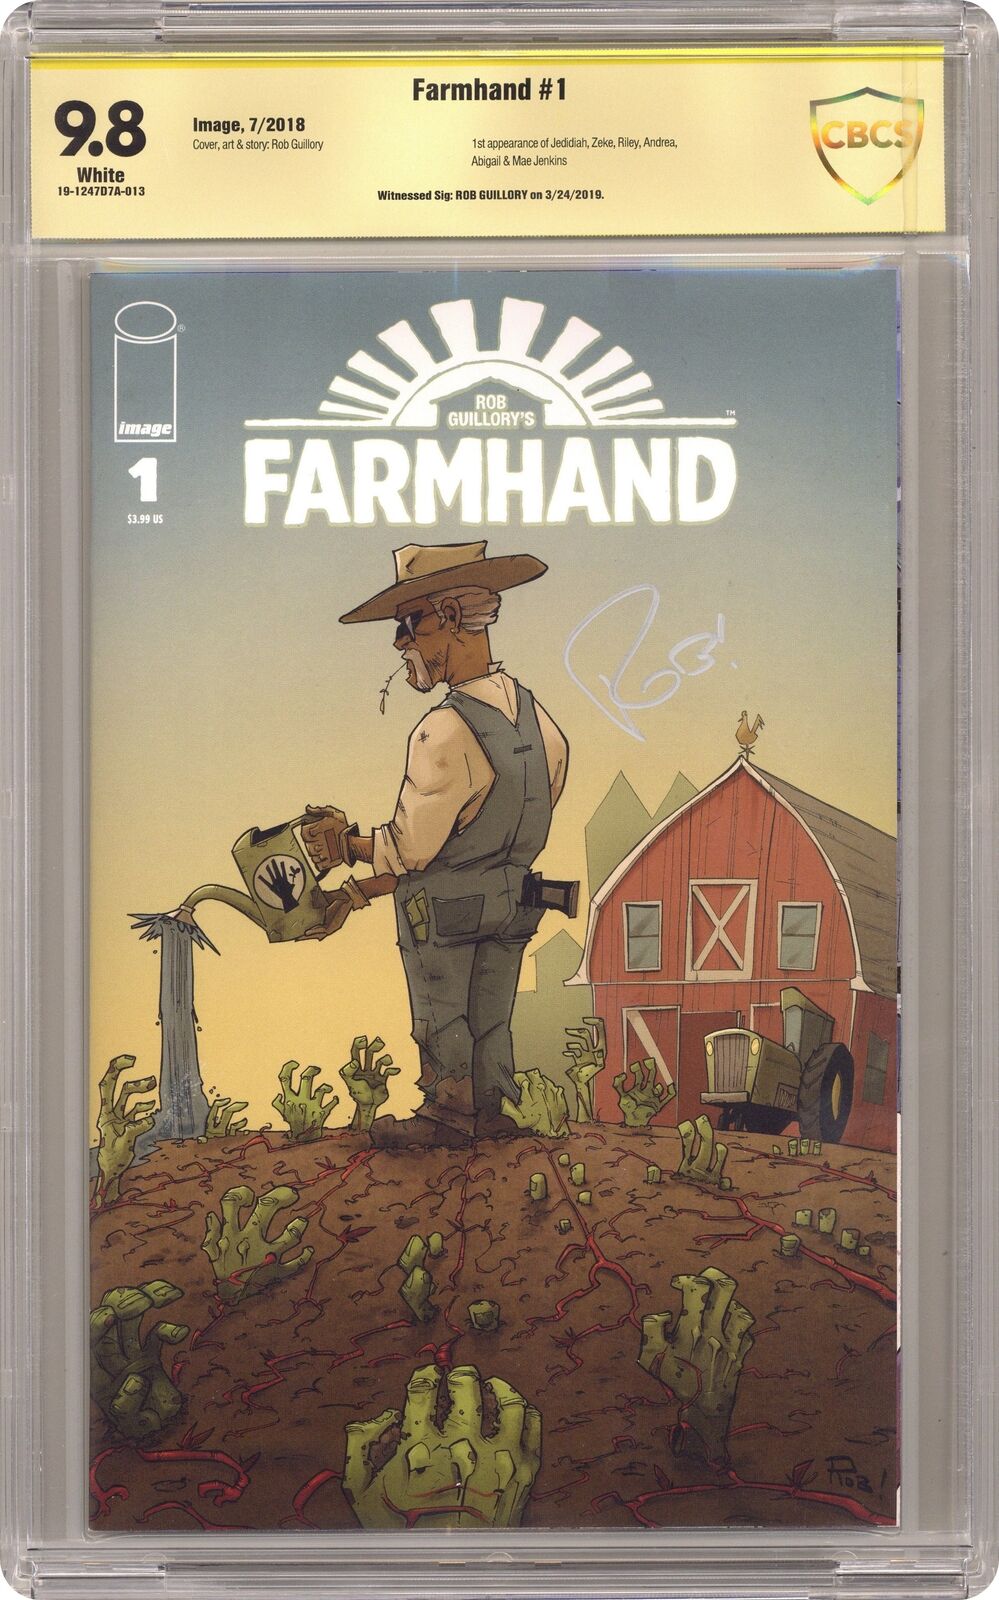 Farmhand #1 Guillory CBCS 9.8 SS Guillory 2018 19-1247D7A-013